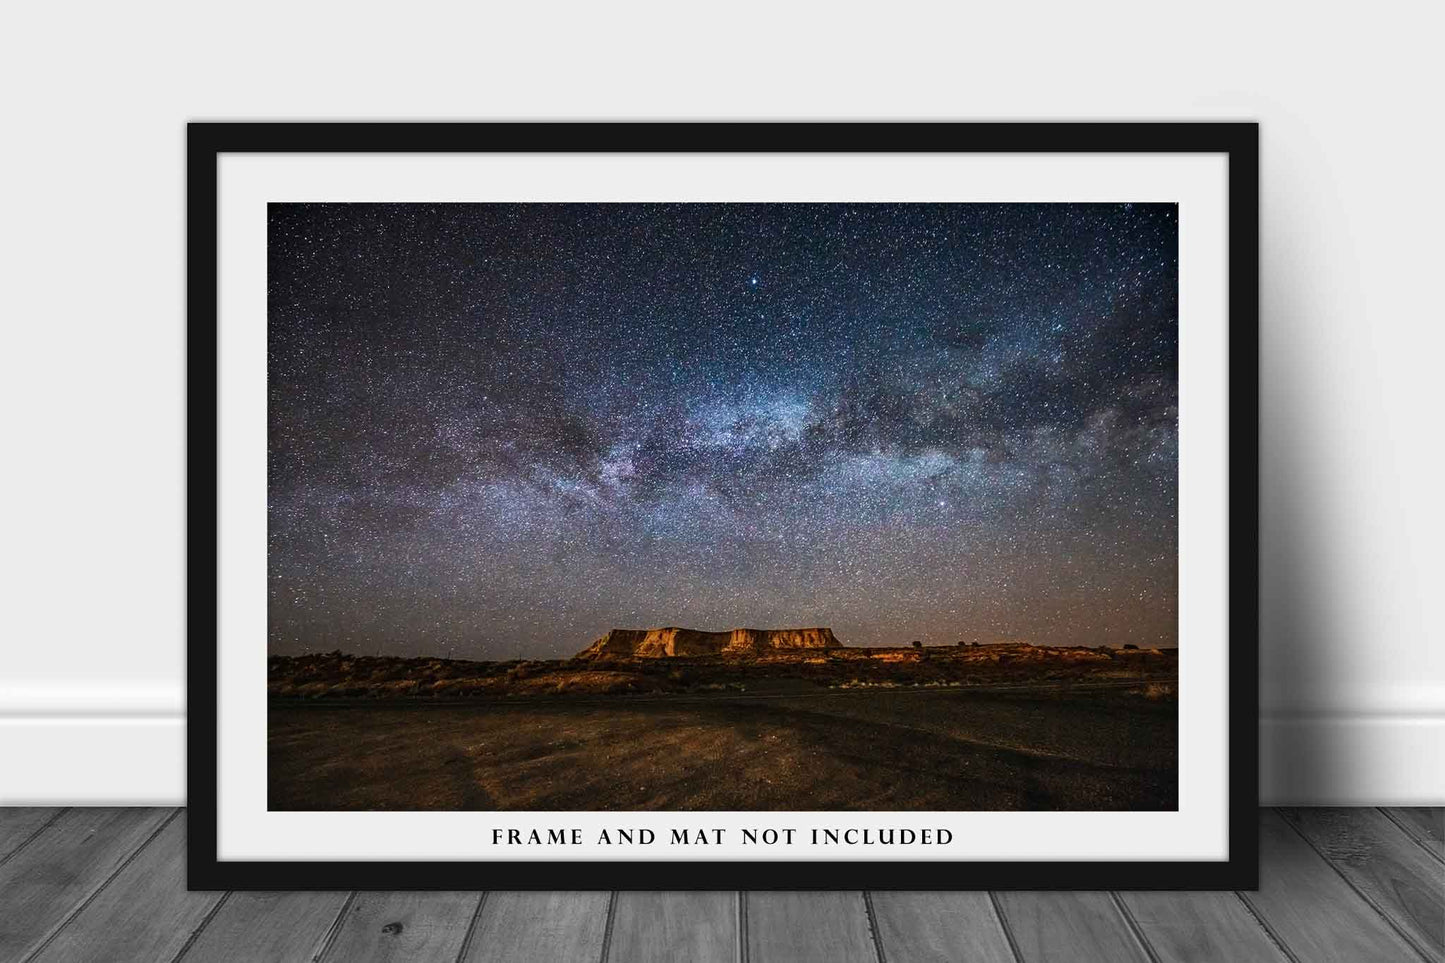 Night Sky Photography Print (Not Framed) Picture of Milky Way Spanning Horizon Over Mesa in Arizona Desert Wall Art Celestial Decor